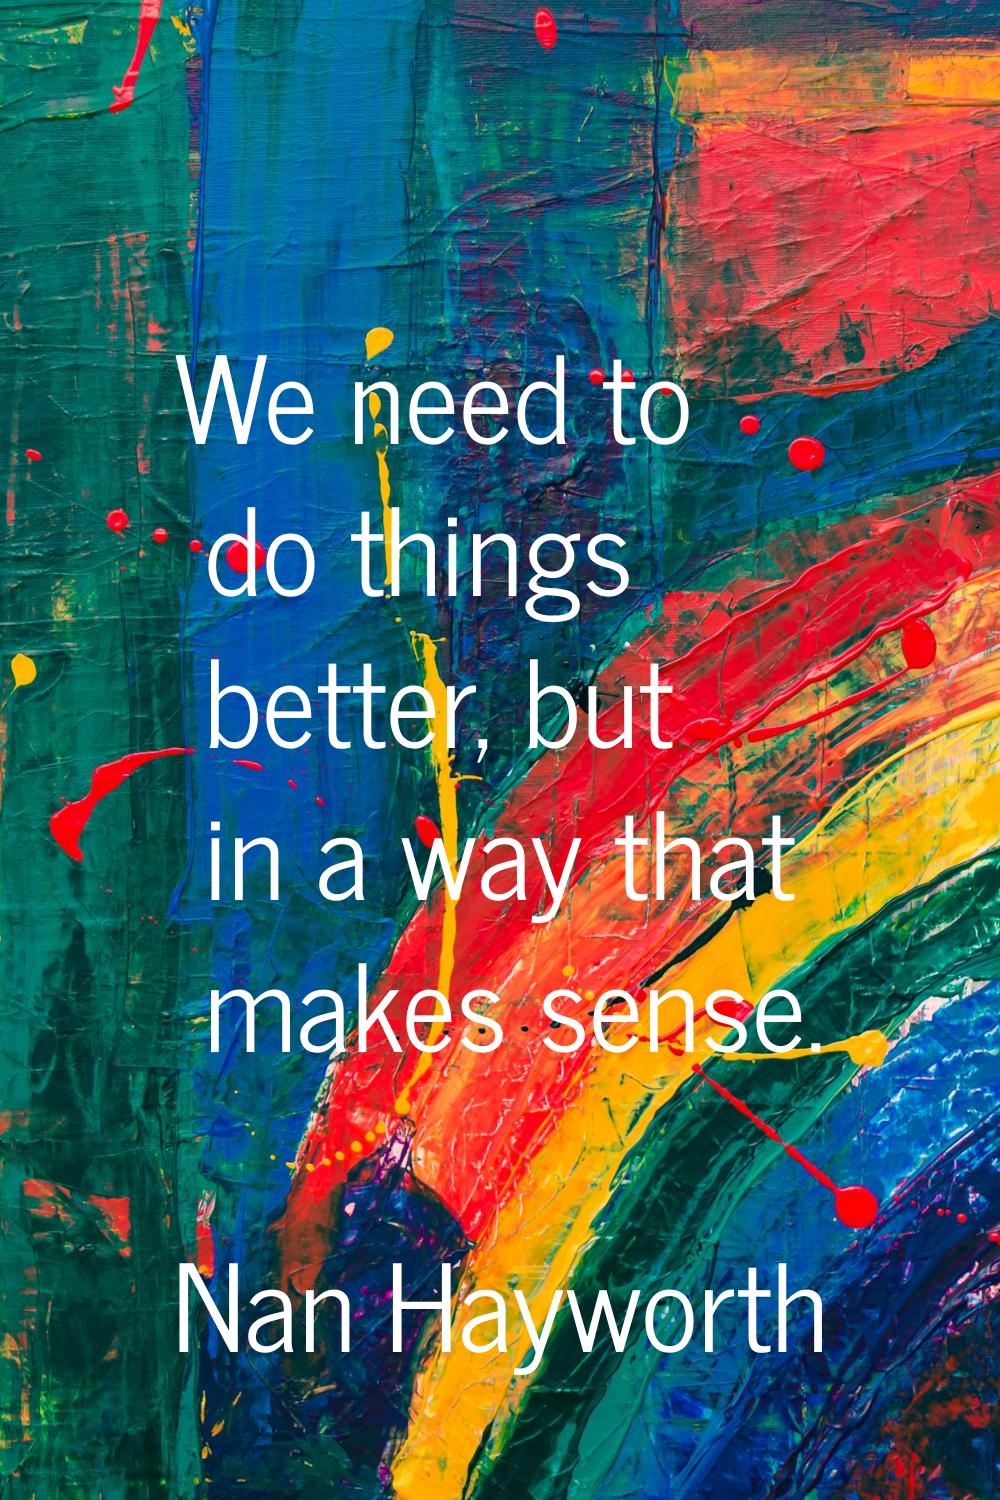 We need to do things better, but in a way that makes sense.